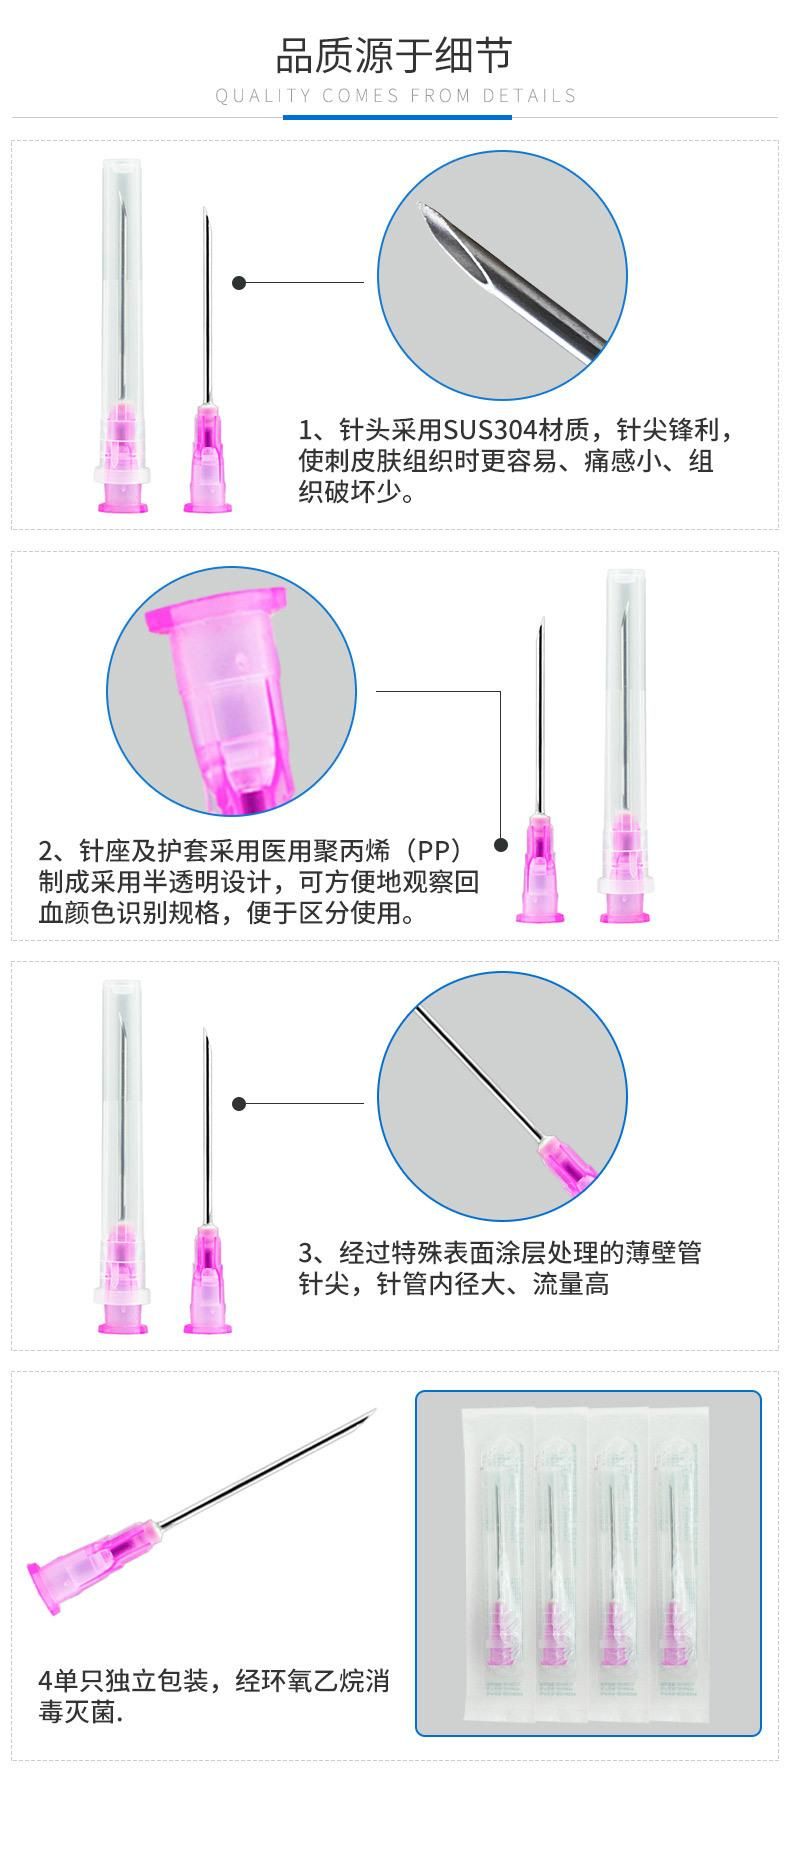 Disposable Medical Sterile Injection Needle 0.45mm*15.5mm Gauge Medical Syringe Needle Needle Device